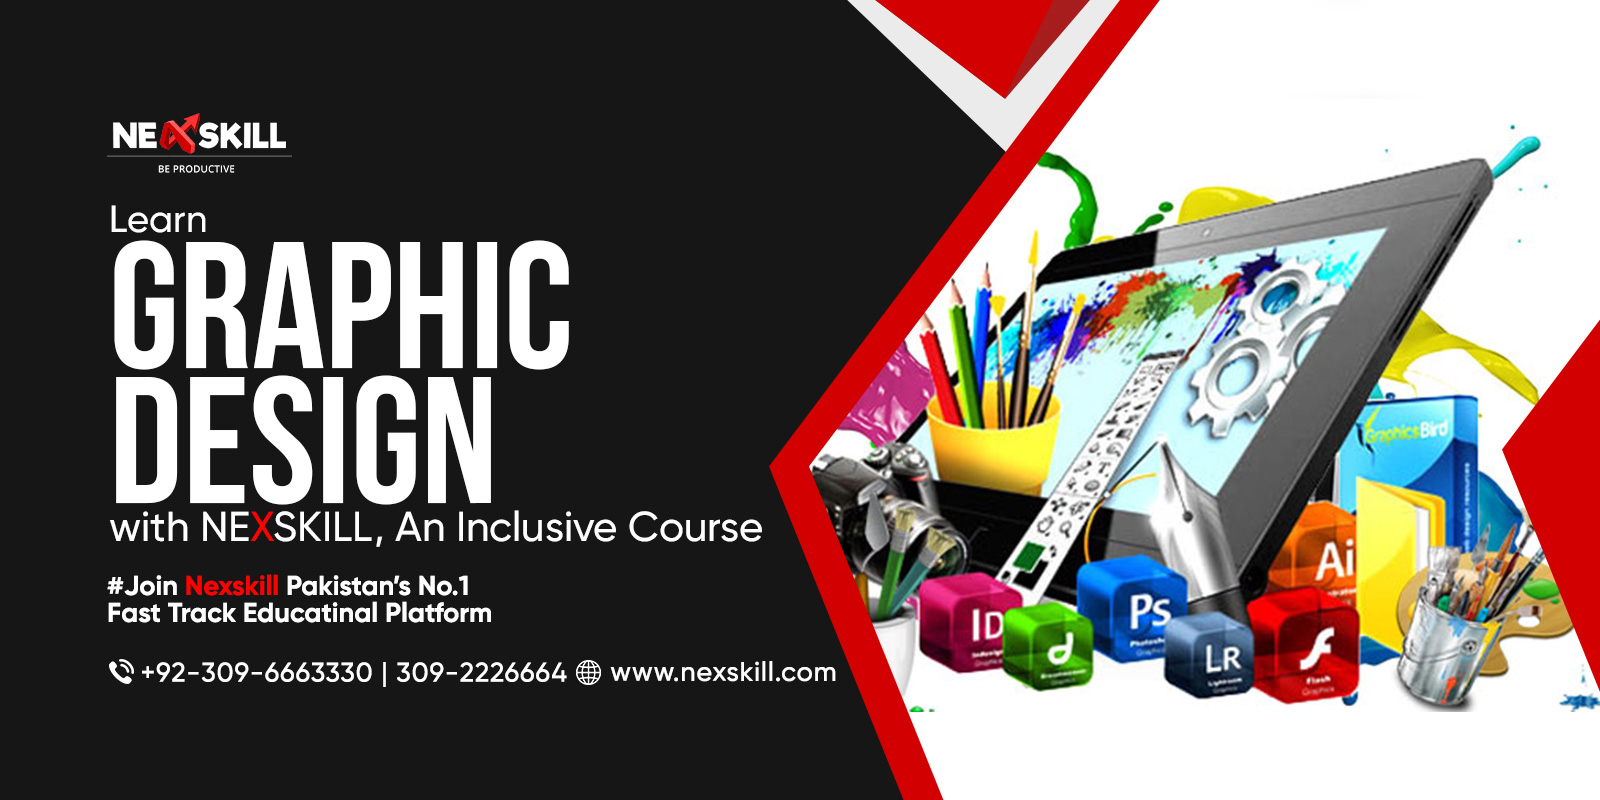 Learn Graphic Design with Nexskill, An Inclusive Course